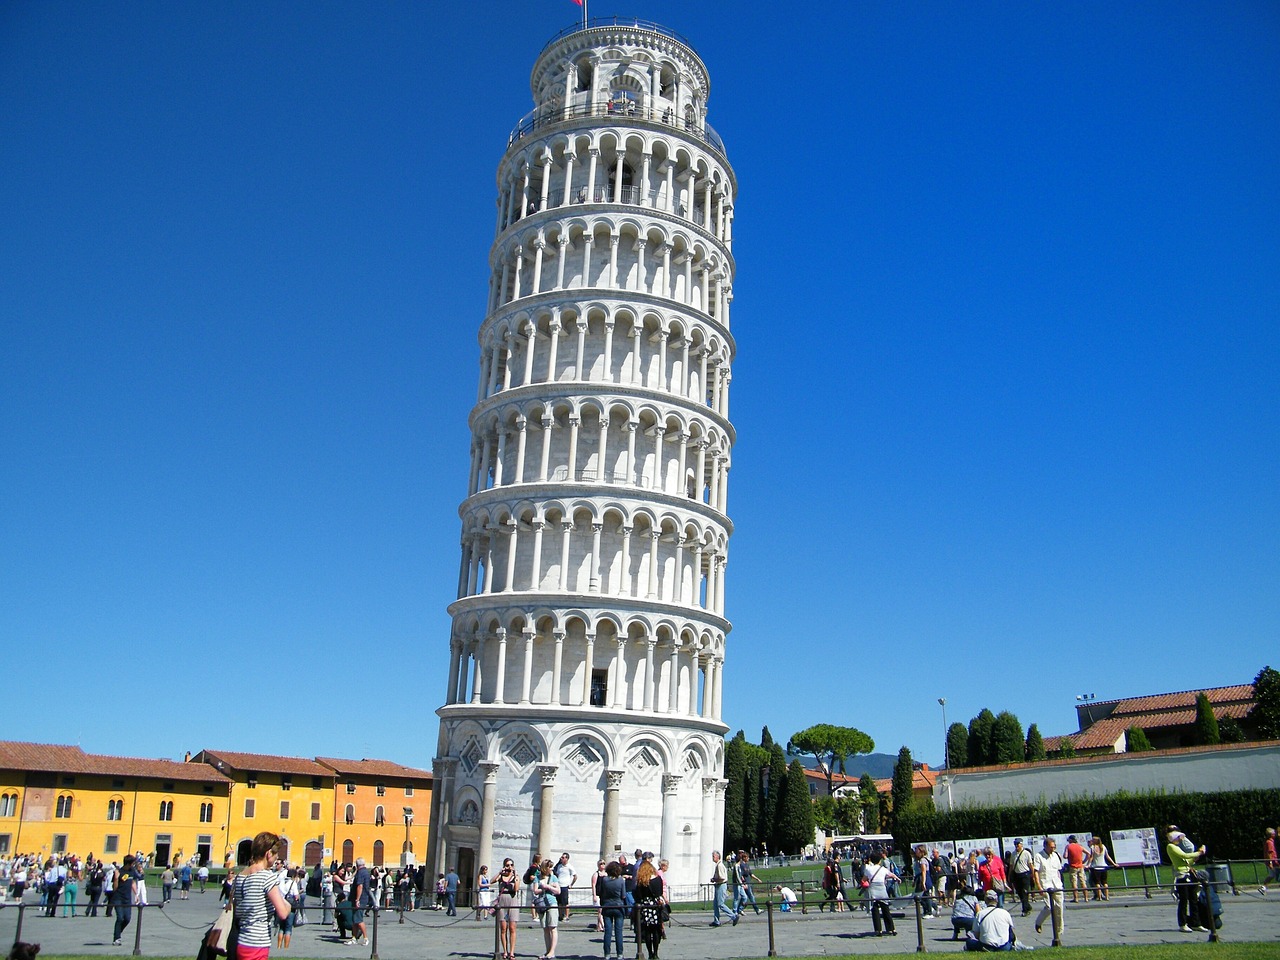 "Subsidence Concerns Prompt Closure of Italy's Famed Leaning Tower of Pisa – CNN Details"